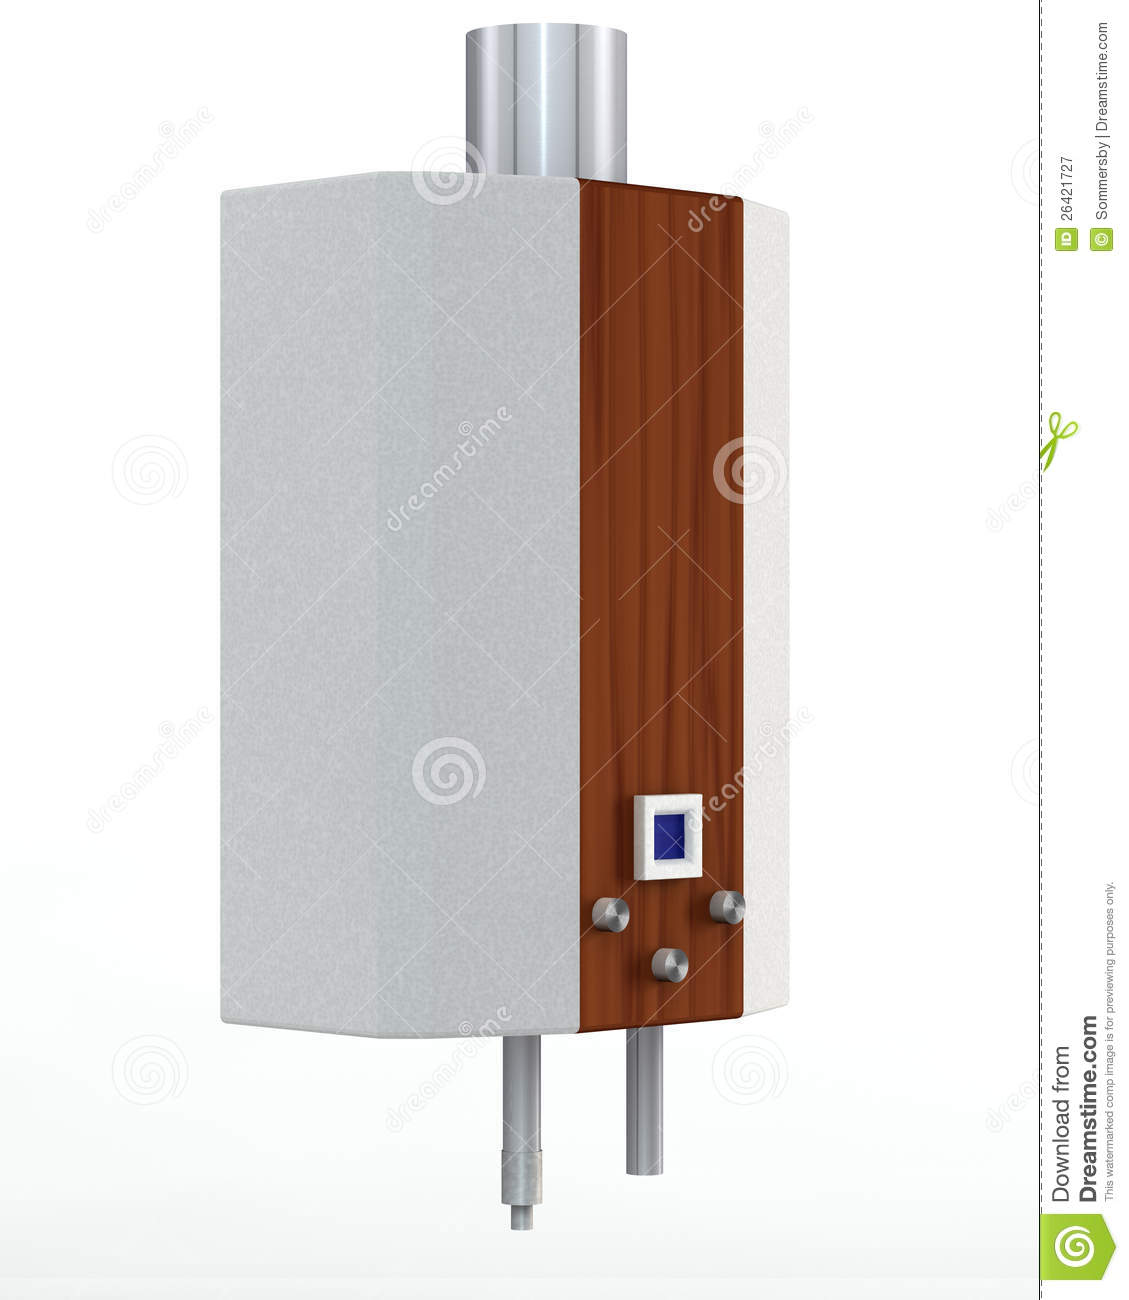 Water Heater Royalty Free Stock Photography   Image  26421727